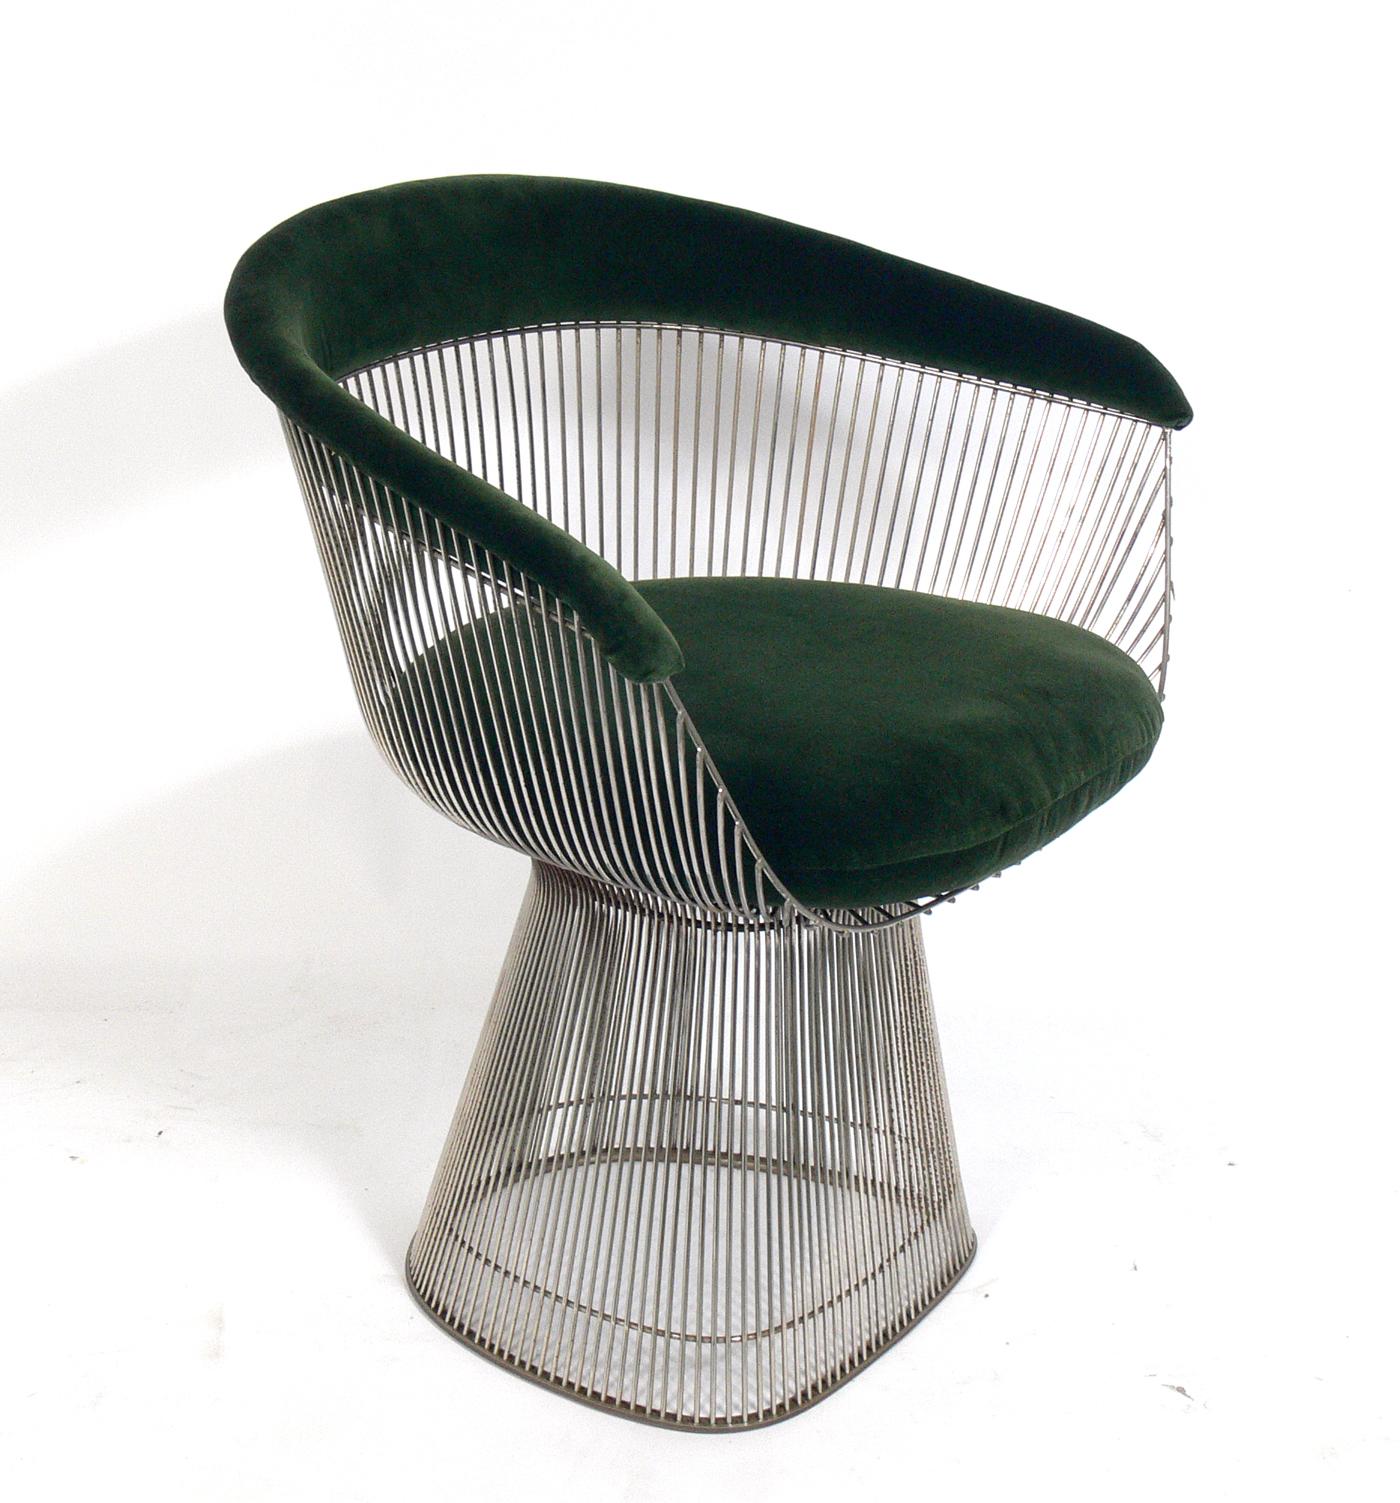 Set of six sculptural chrome dining chairs, designed by Warren Platner for Knoll, American, circa 1960s. They have been reupholstered in a plush deep green velvet. This listing is for the set of six dining chairs only.